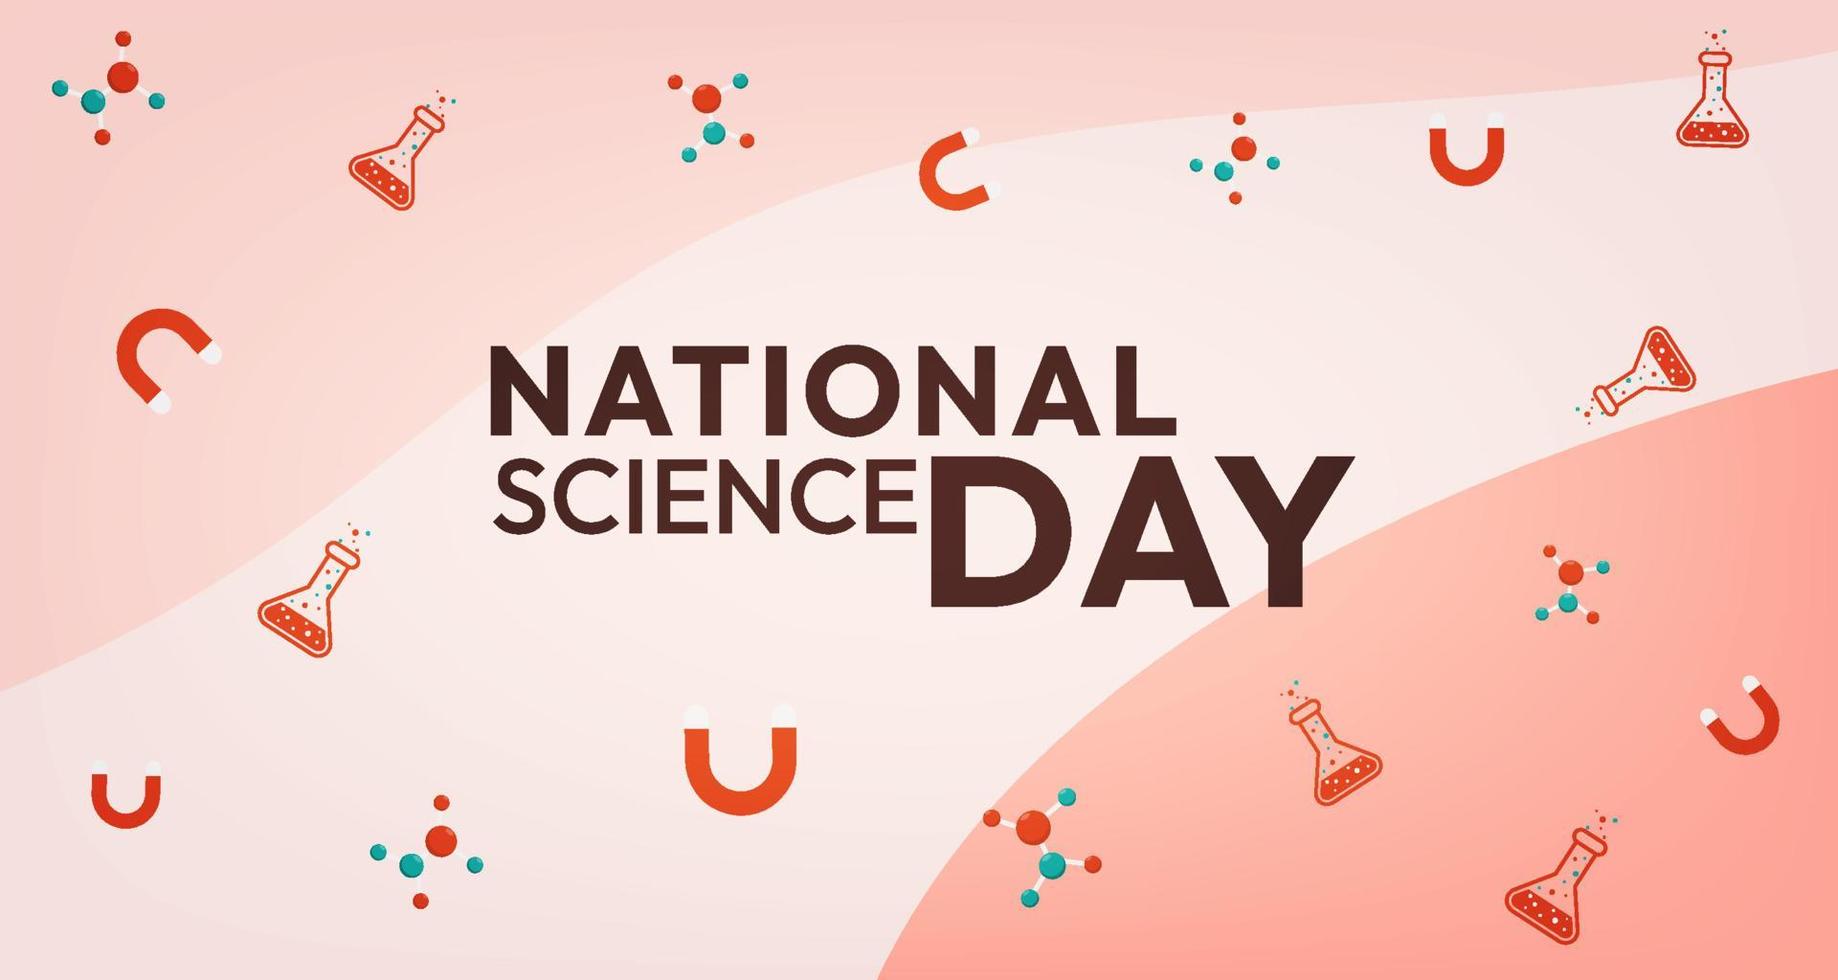 National Science Day Background with Chemistry Objects Pattern Vector Design